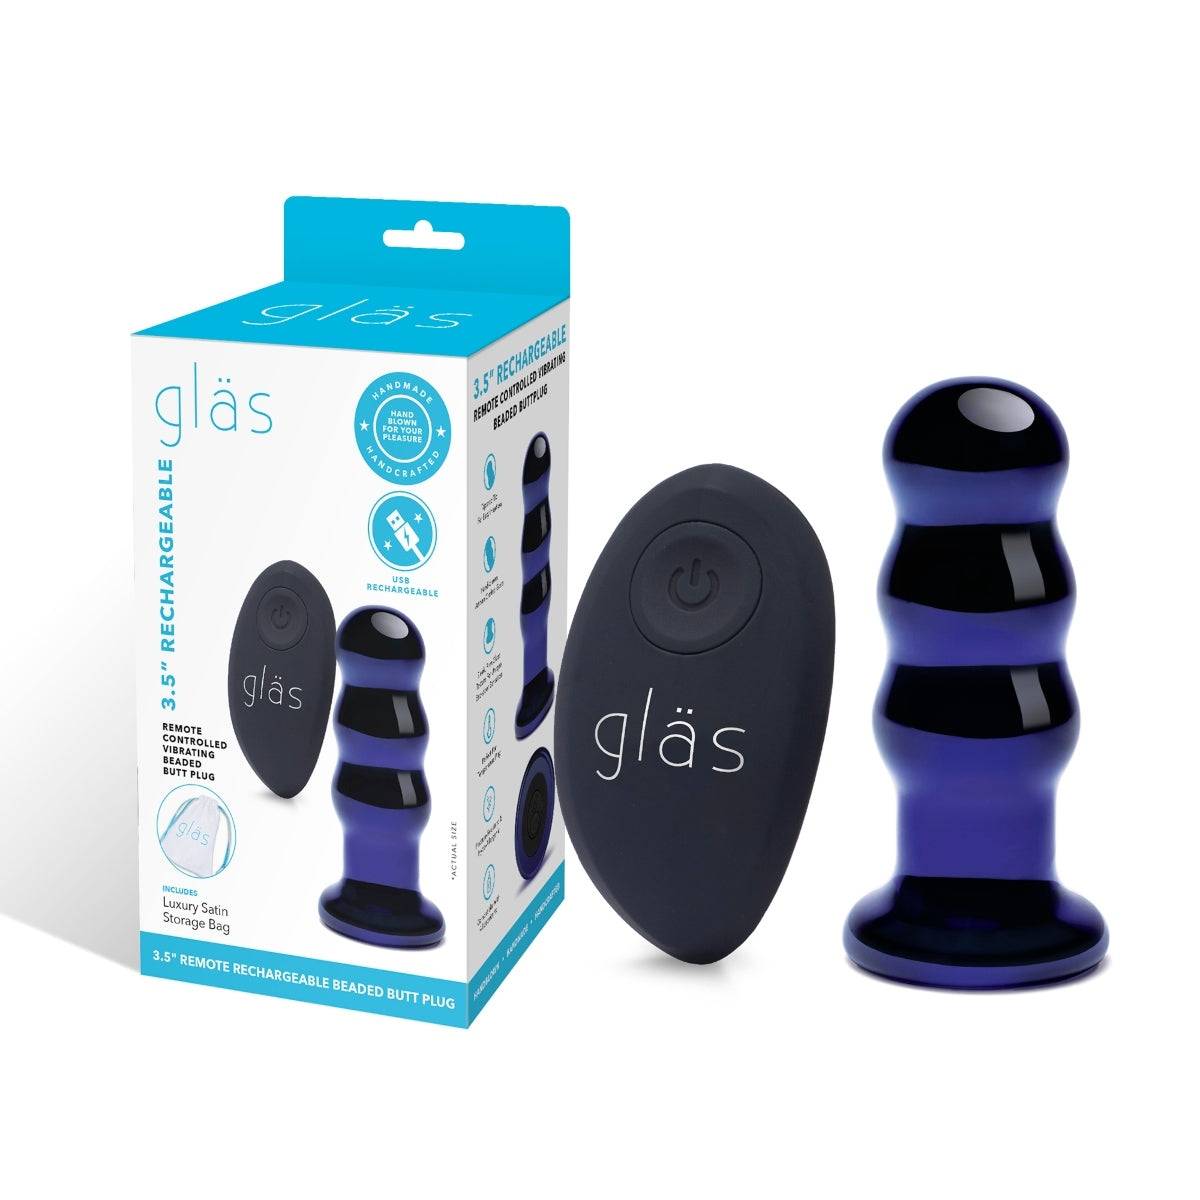 Glas Rechargeable Remote Controlled Vibrating Beaded Butt Plug Blue 3.5 Inch - Simply Pleasure